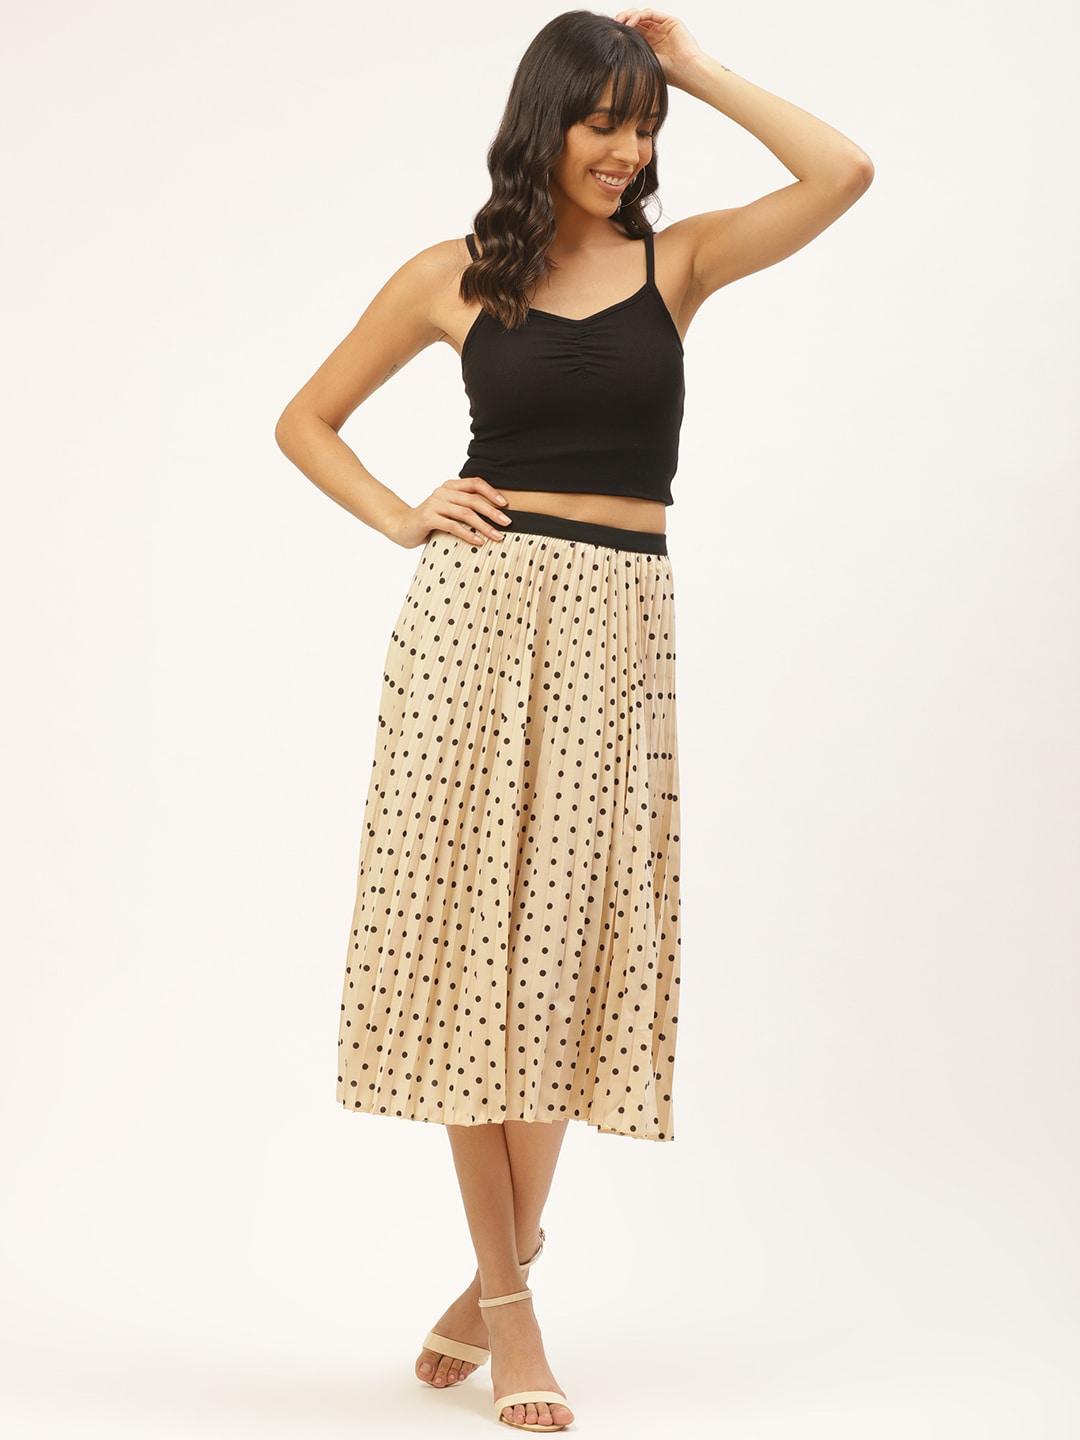 anvi-be-yourself-women-beige-&-black-polka-dots-printed-accordion-pleated-a-line-skirt